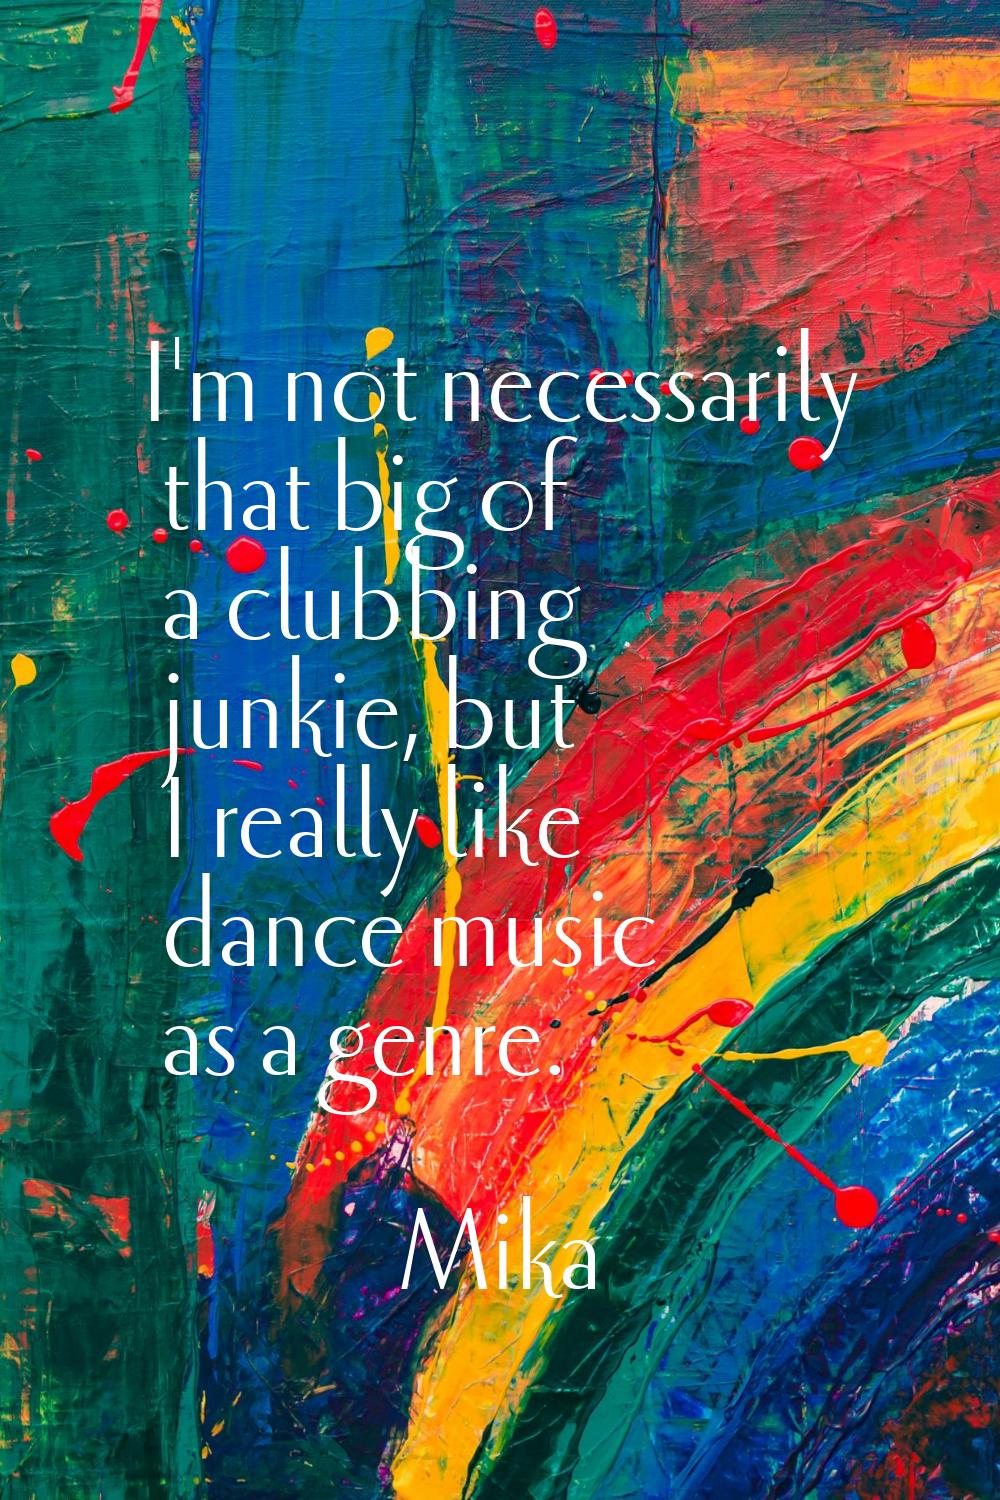 I'm not necessarily that big of a clubbing junkie, but I really like dance music as a genre.